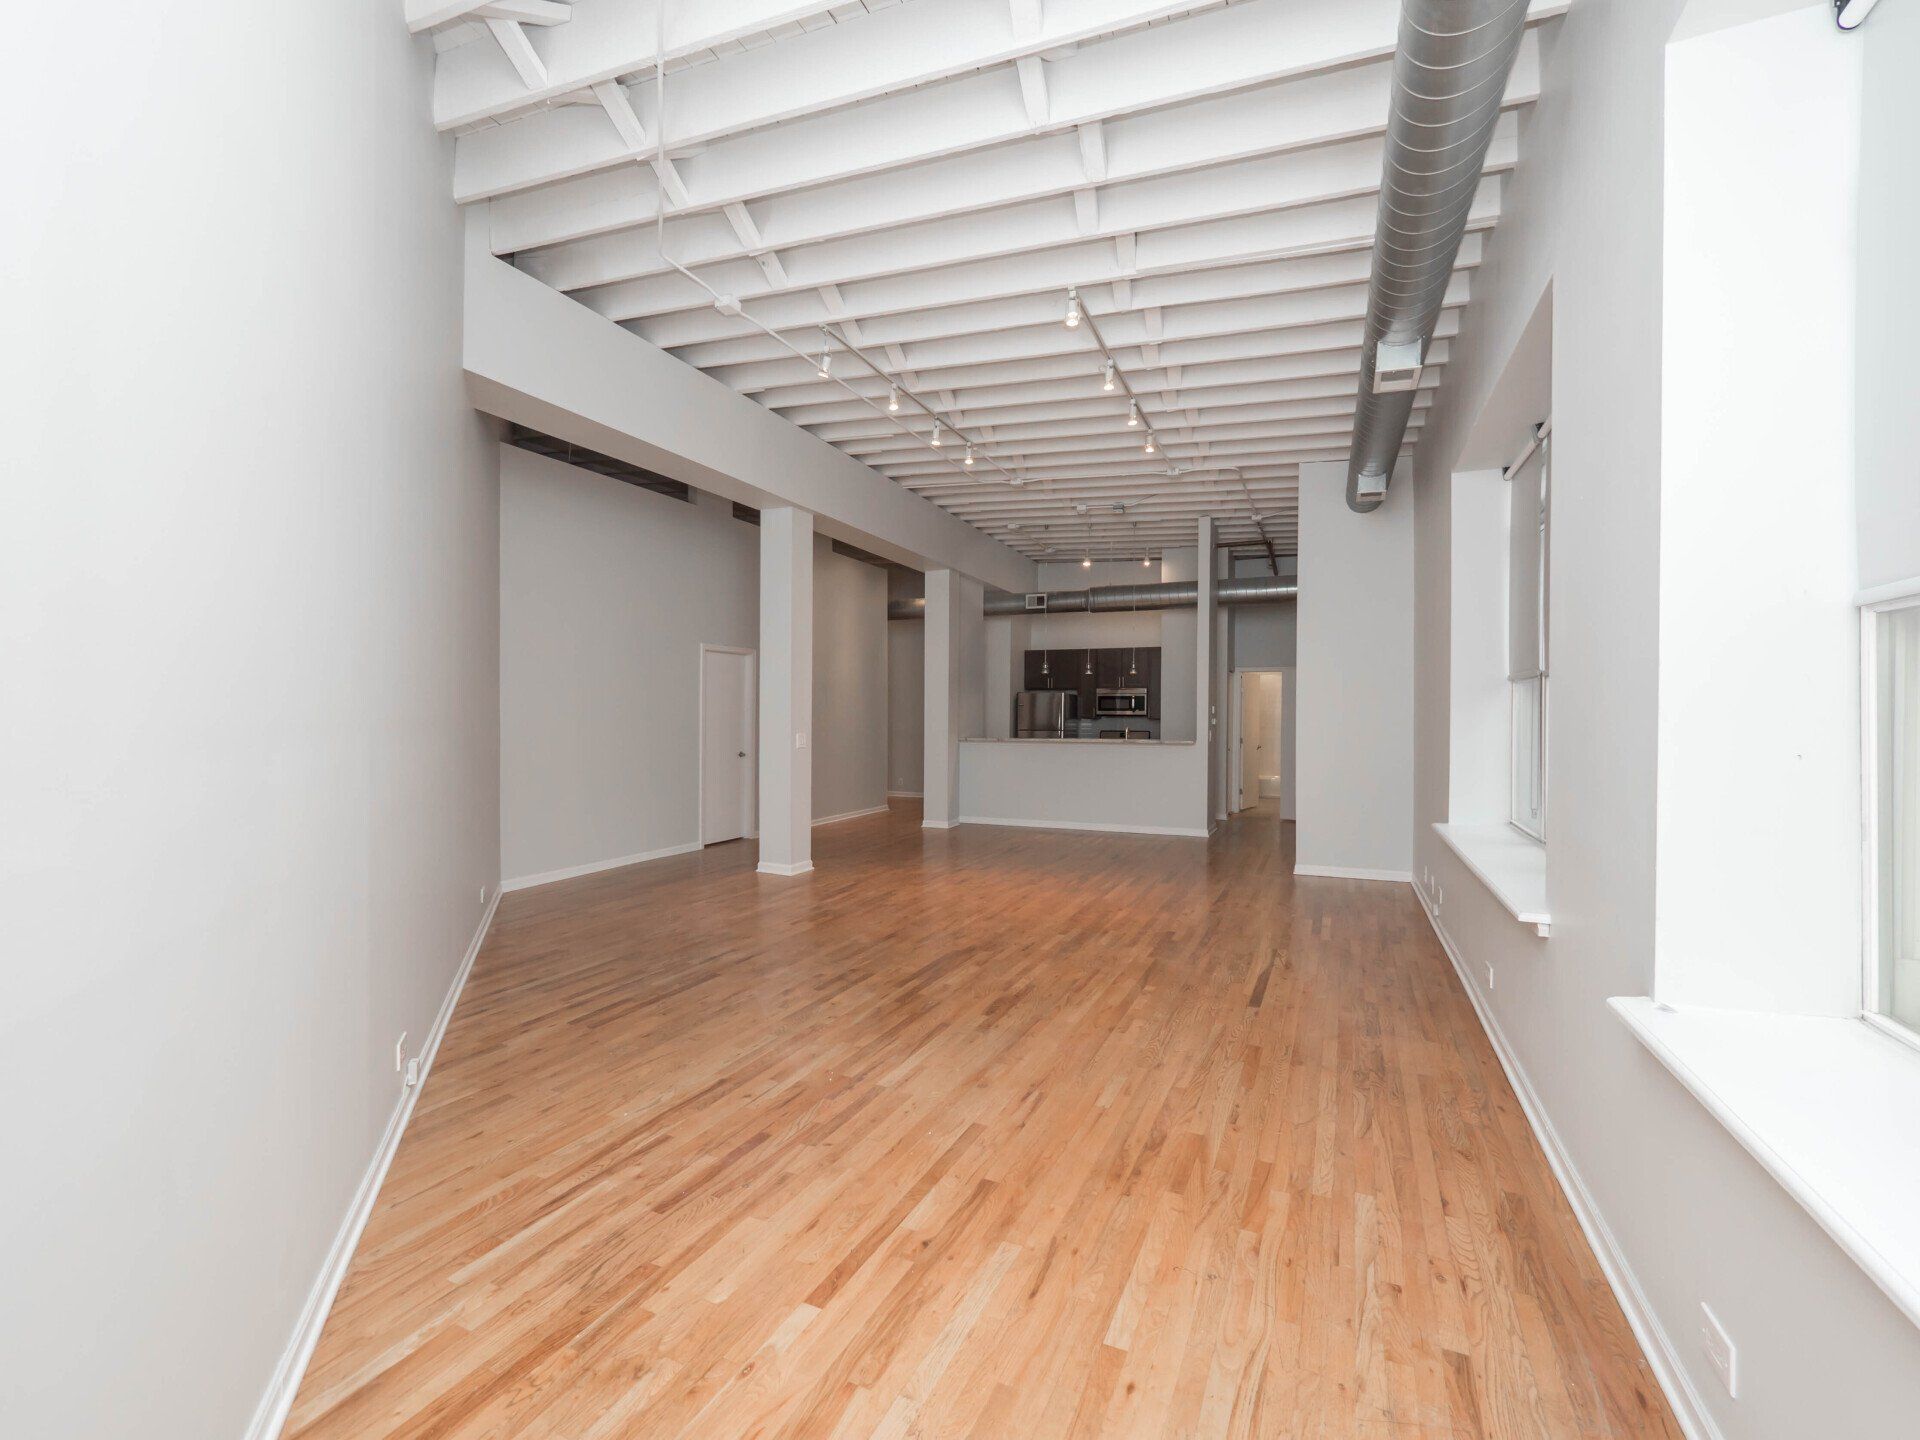 An empty room with hardwood floors and white walls at 1550 North Damen.